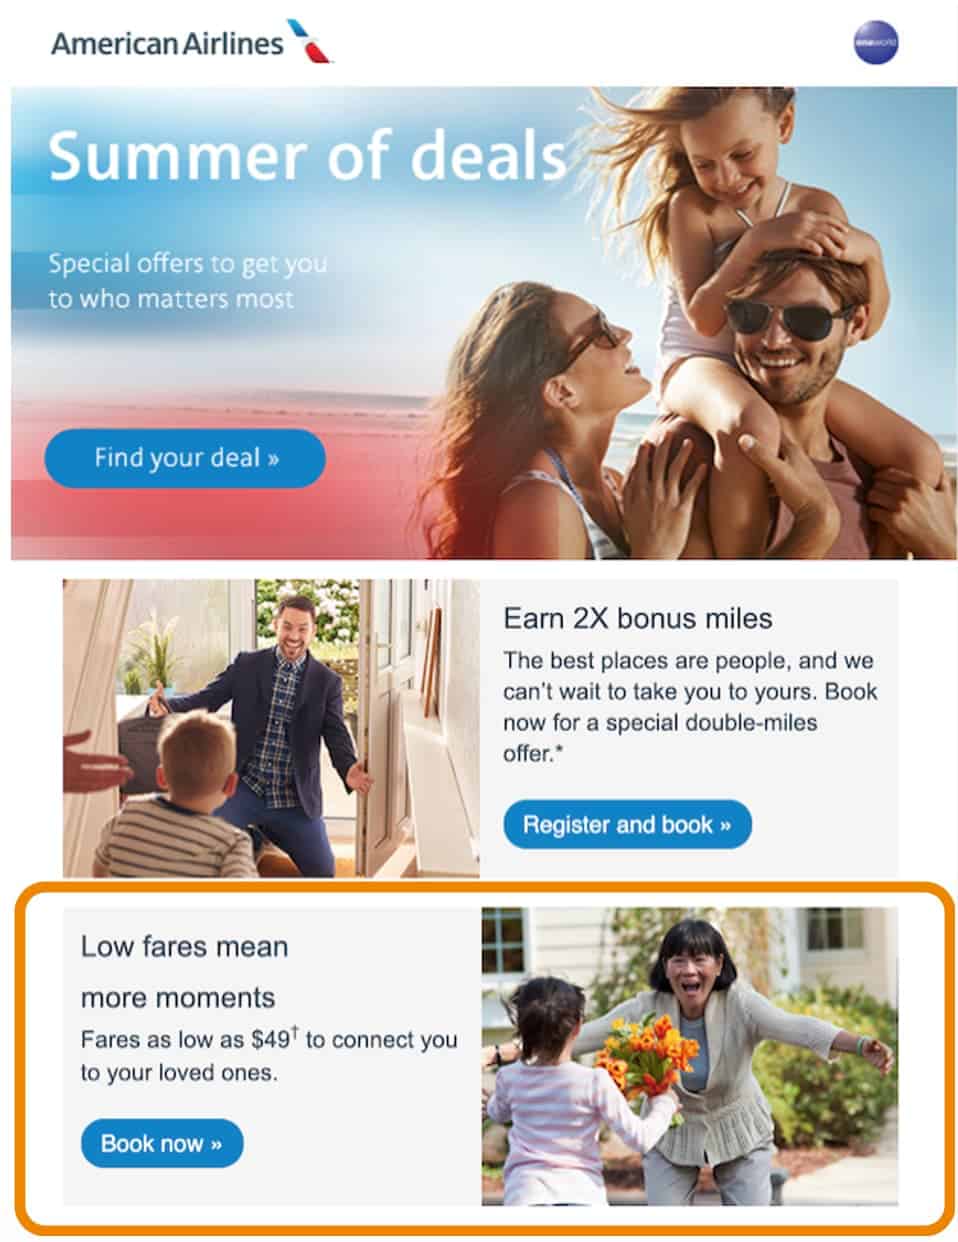 AA Sumer of deals email